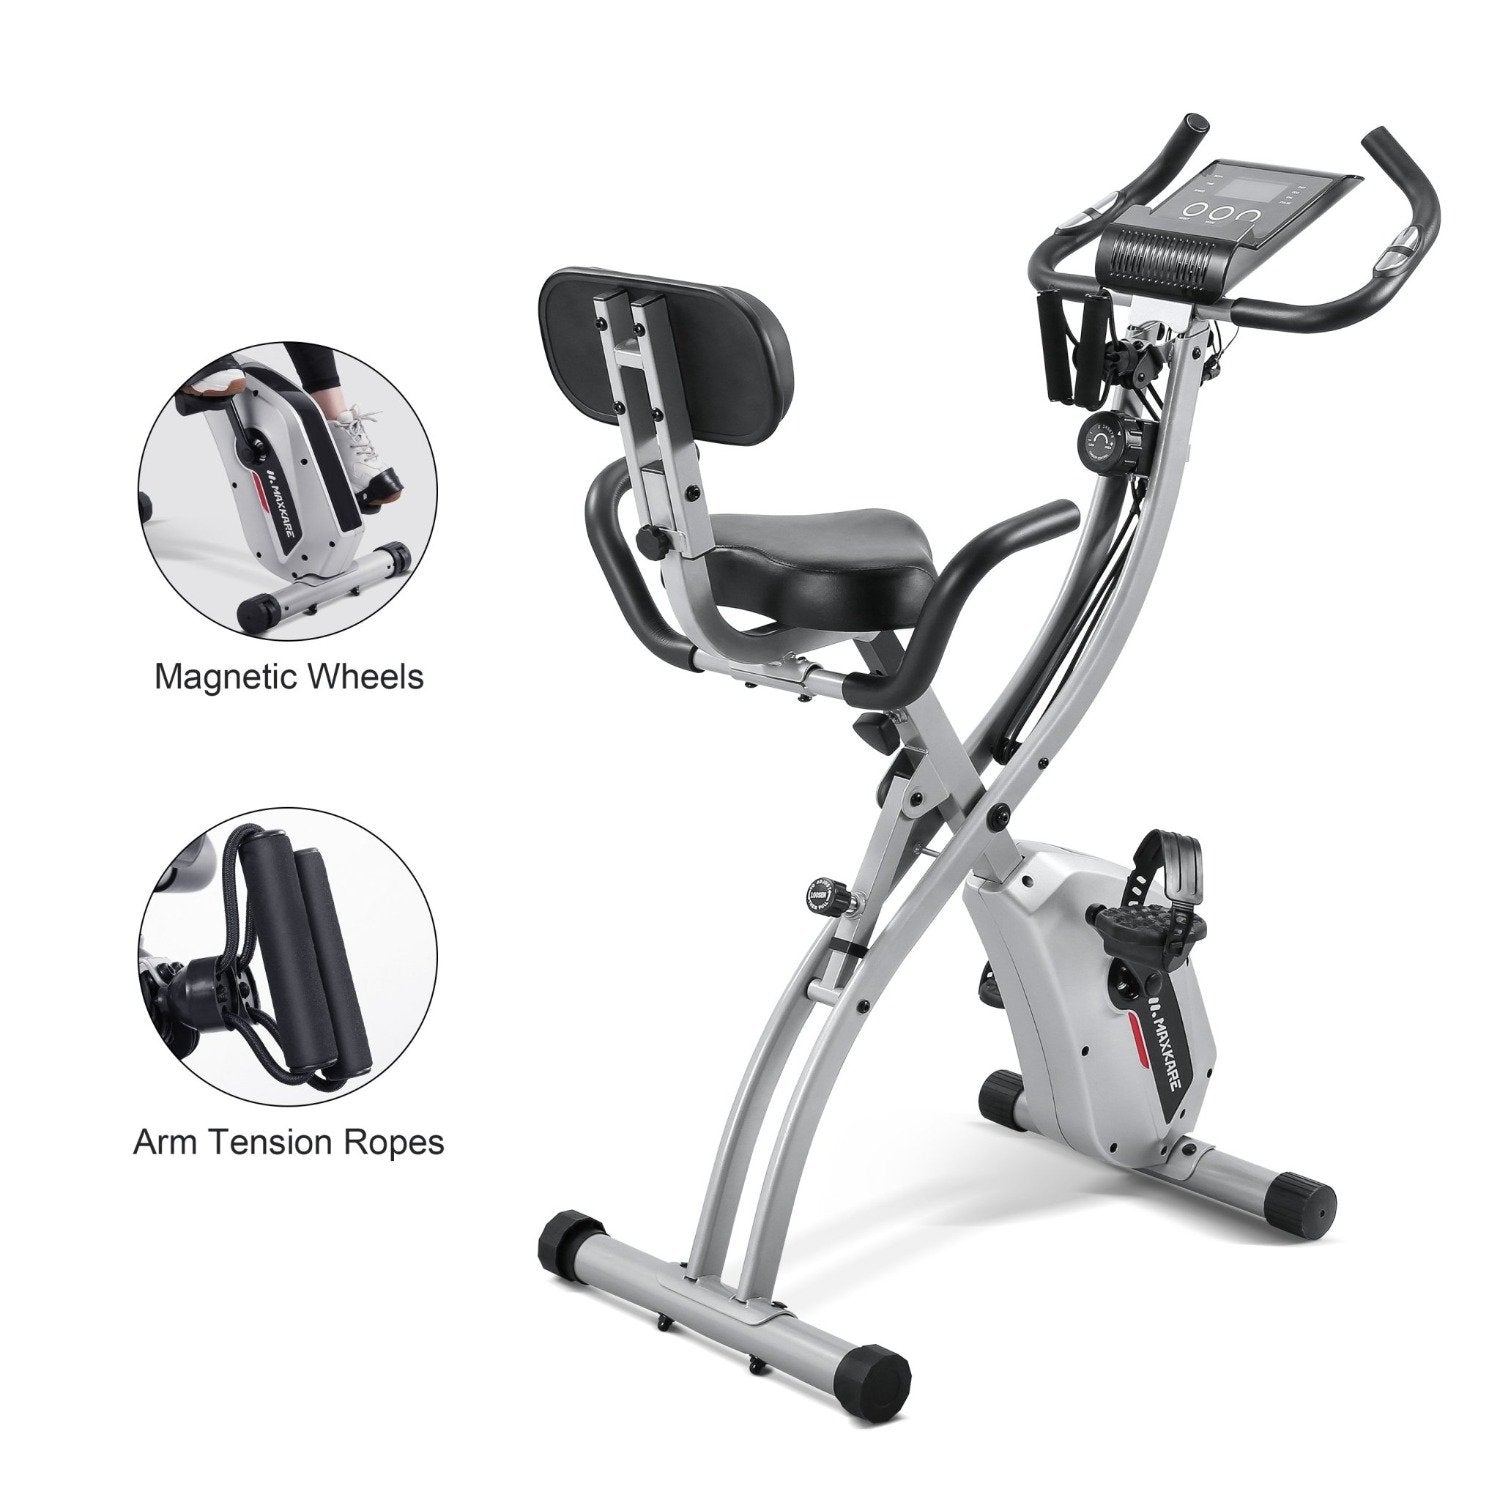 Load image into Gallery viewer, Maxkare Upright Folding Exercise Bike Stationary Recumbent Magnetic Indoor Cycling Bike with Arm Resistance Bands/Adjustable Resistance/LCD Monitor for Home Use - NAIPO
